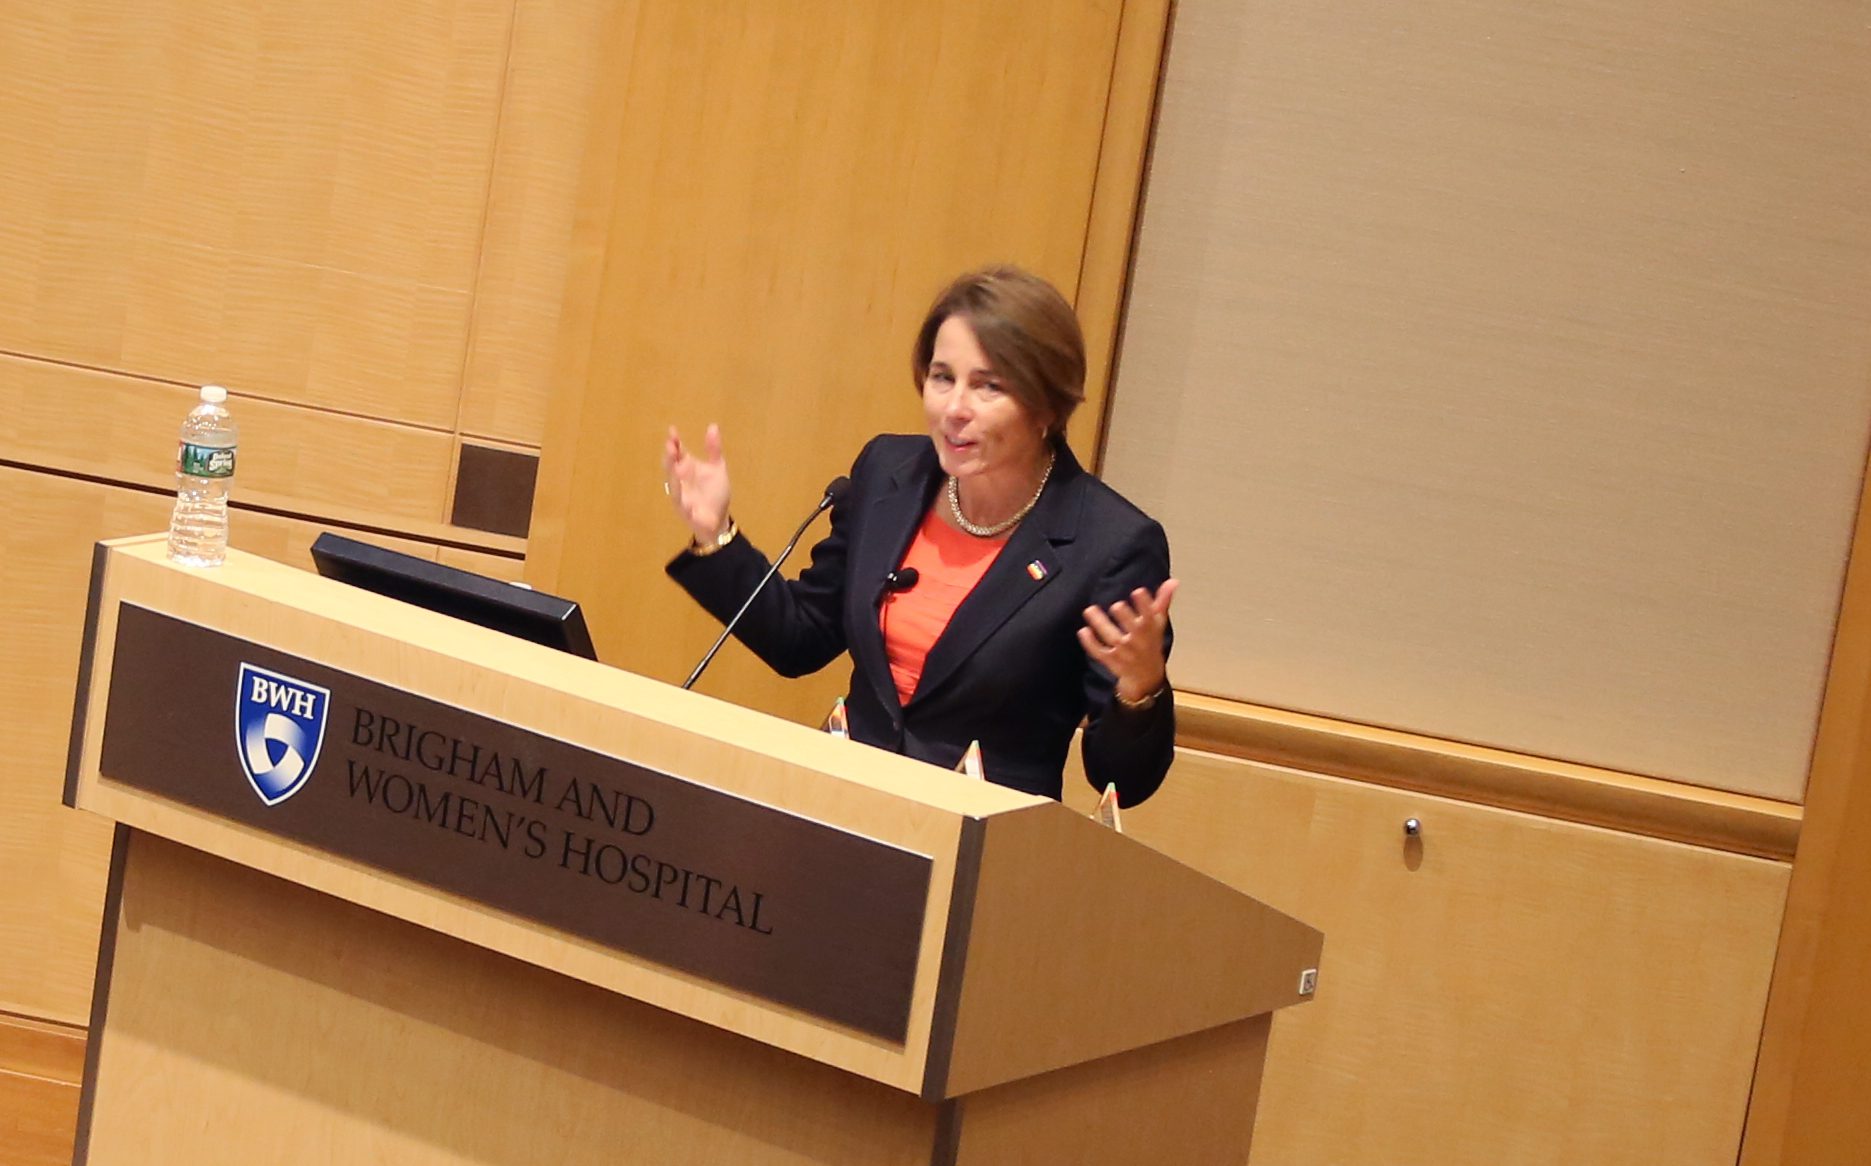 Massachusetts Attorney General Maura Healey speaks at BWH during the first event in a new LGBT Speaker Series.